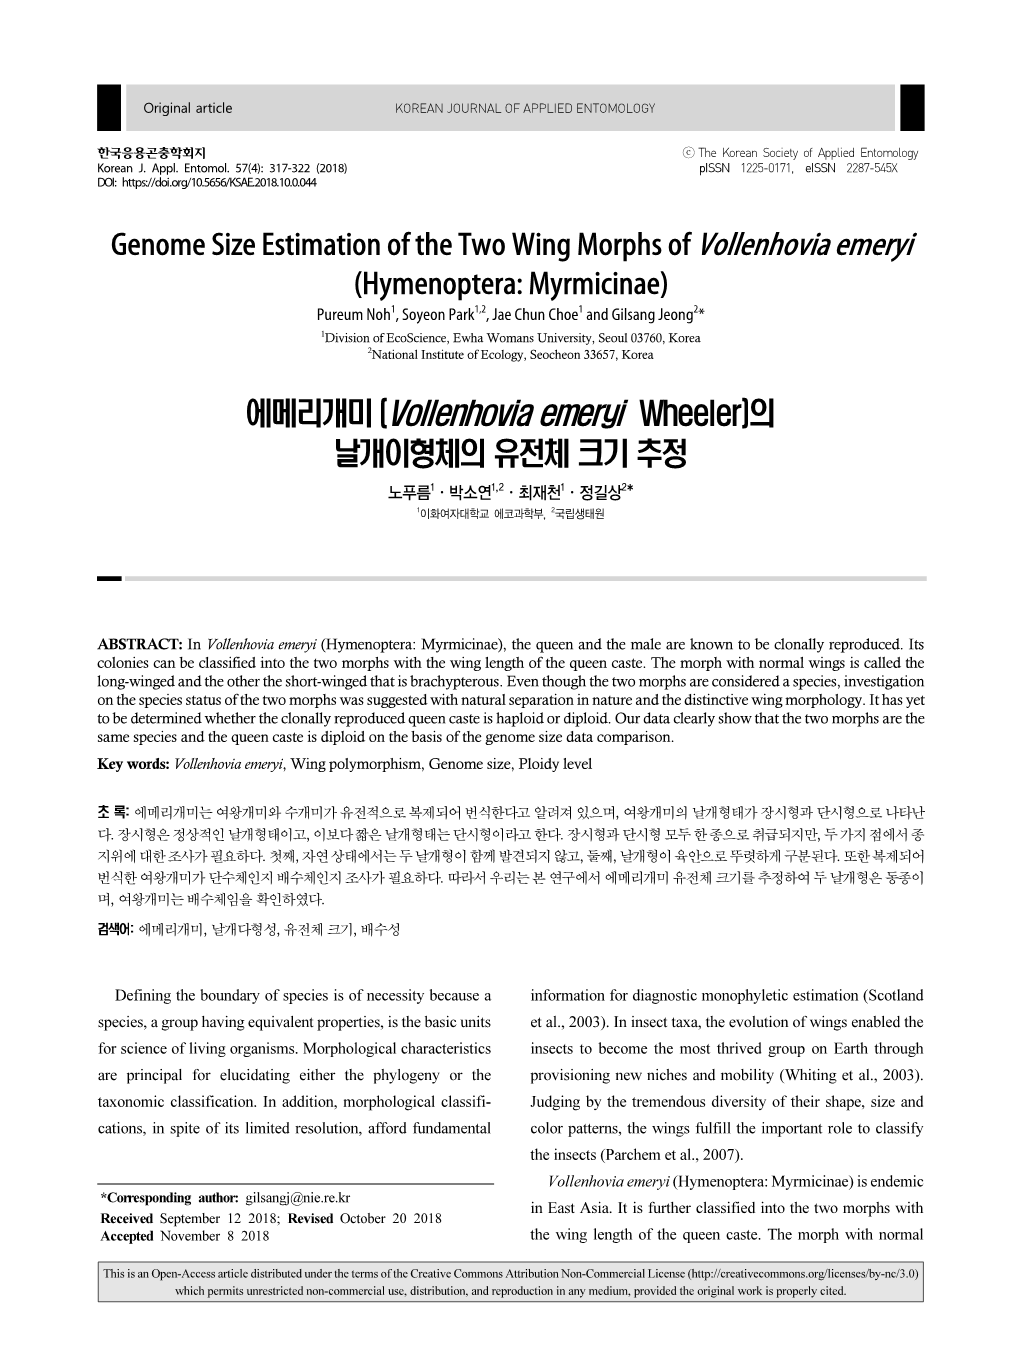 Genome Size Estimation of the Two Wing Morphs of Vollenhovia Emeryi